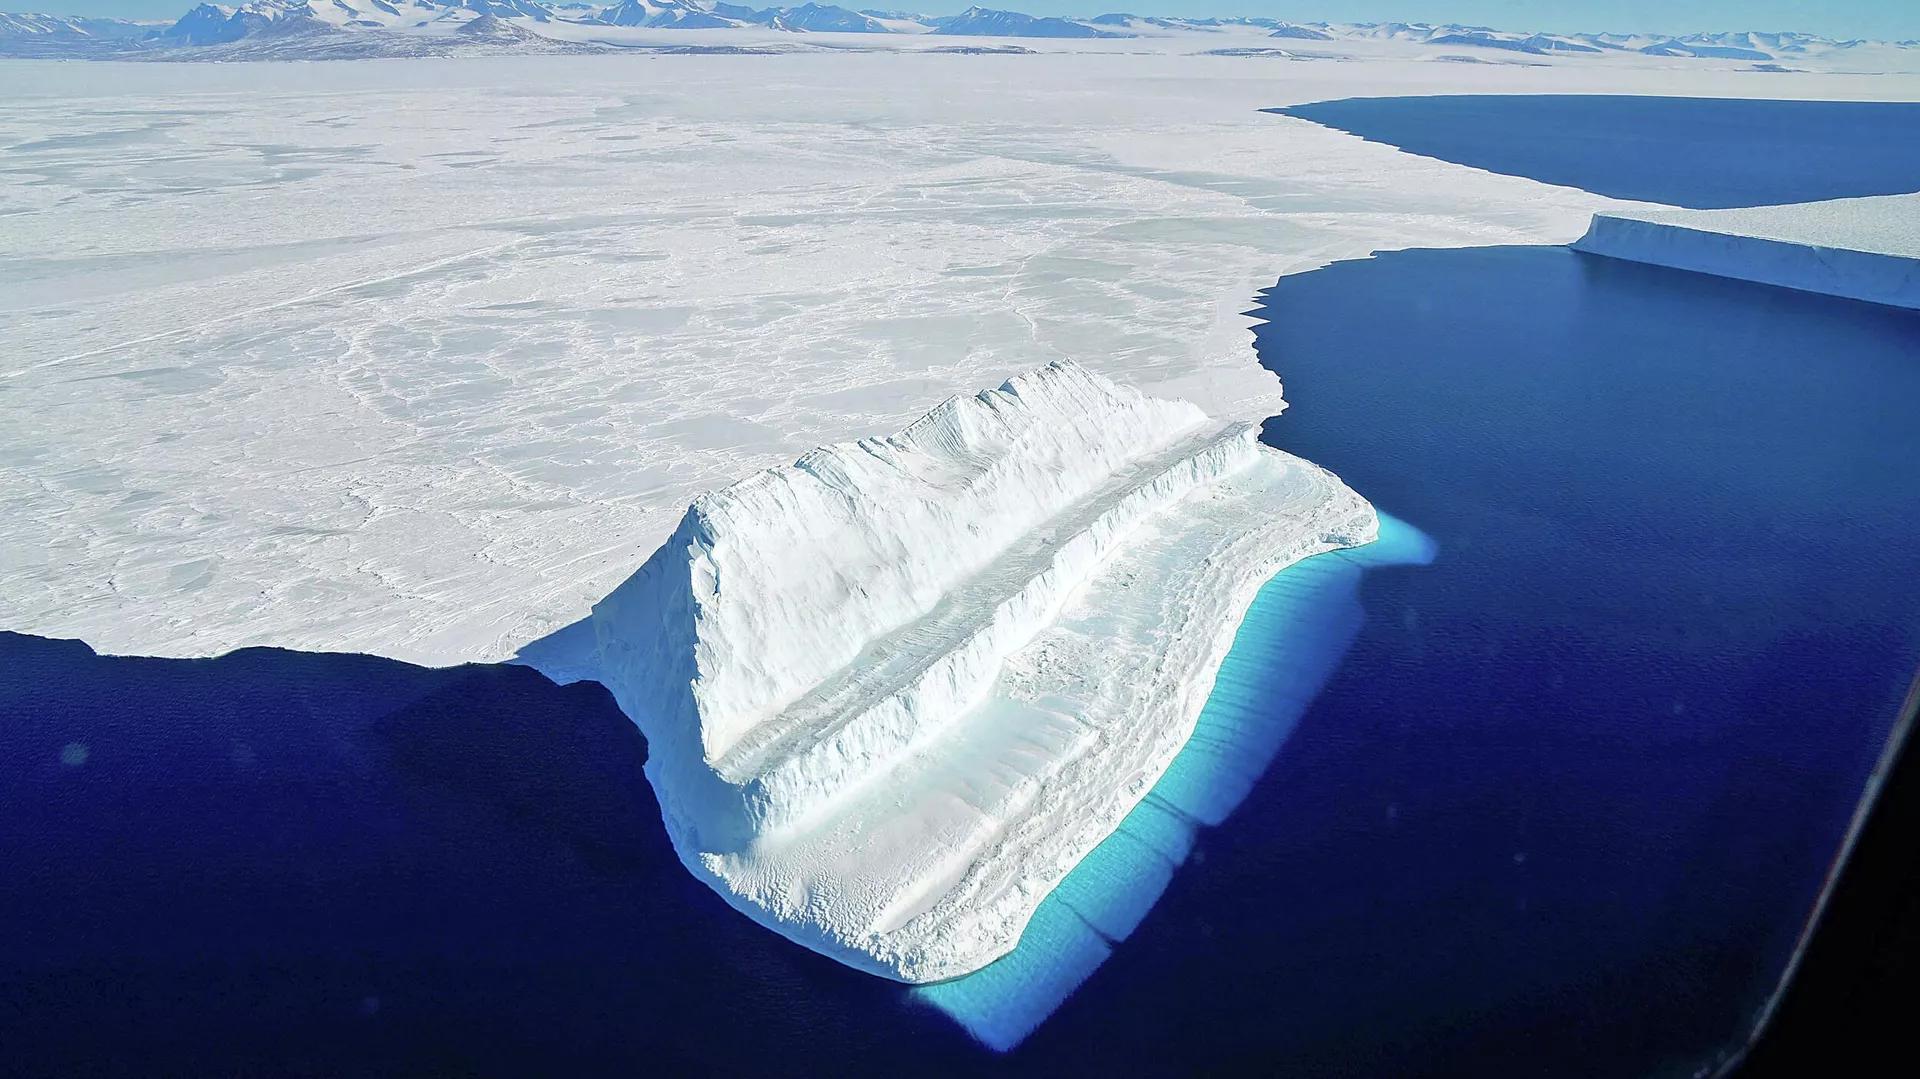 Antarctic Ice Sheet May Be Hiding Earth's Largest Groundwater Reservoir, Scientists Say